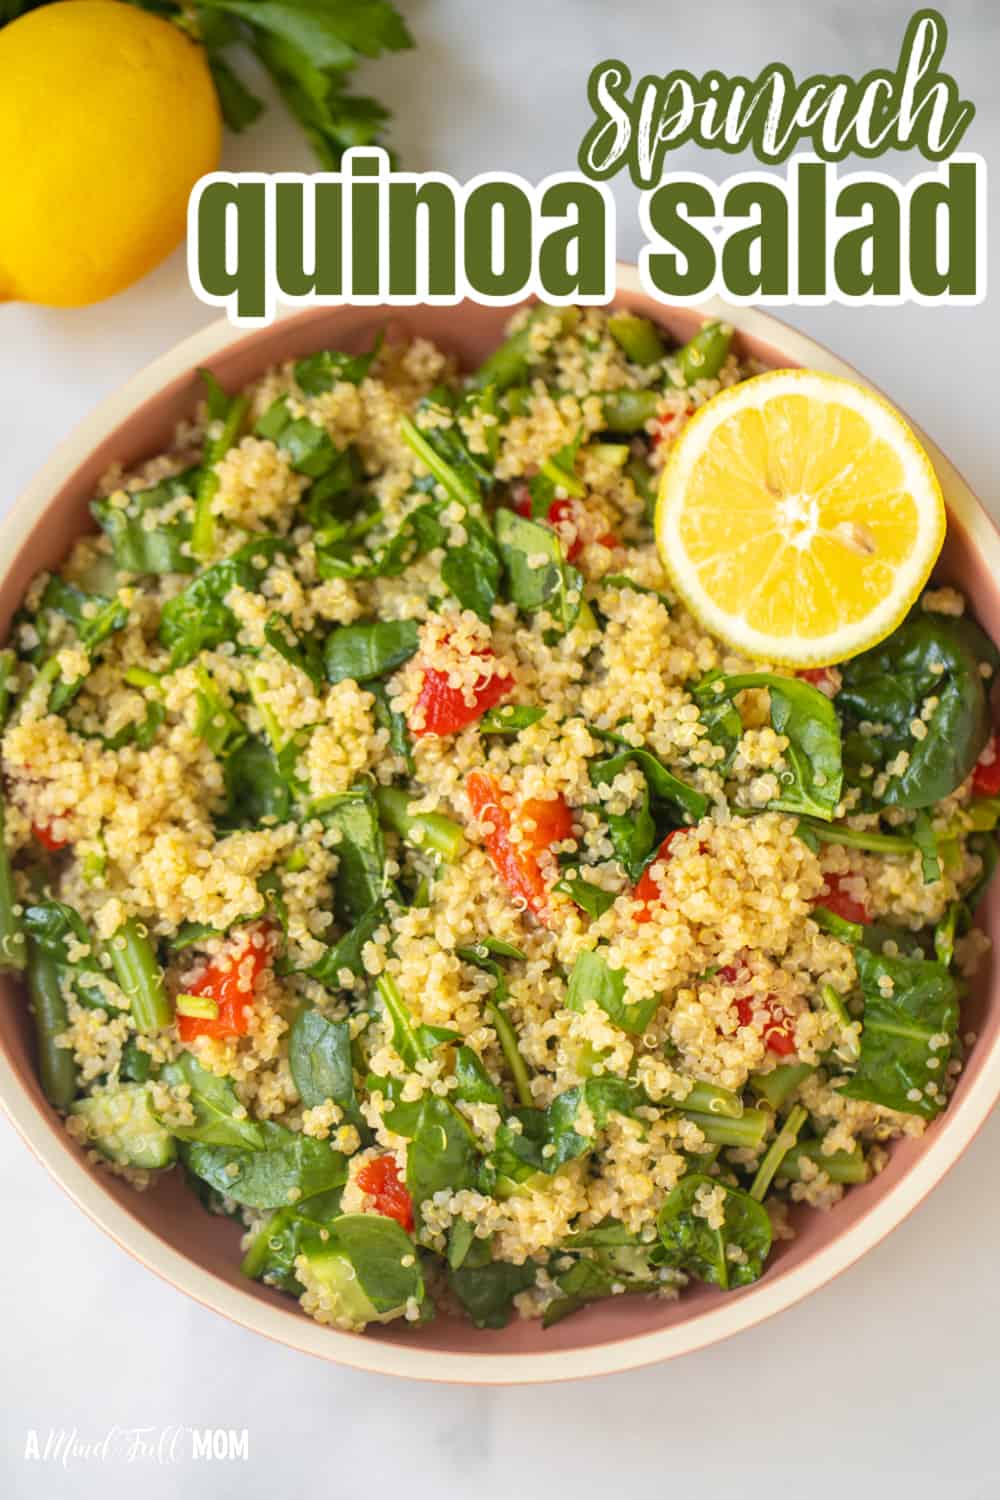 Quinoa Spinach Salad is a simple, protein-packed, refreshing salad, made with quinoa, spinach, and a light and bright lemon dressing.